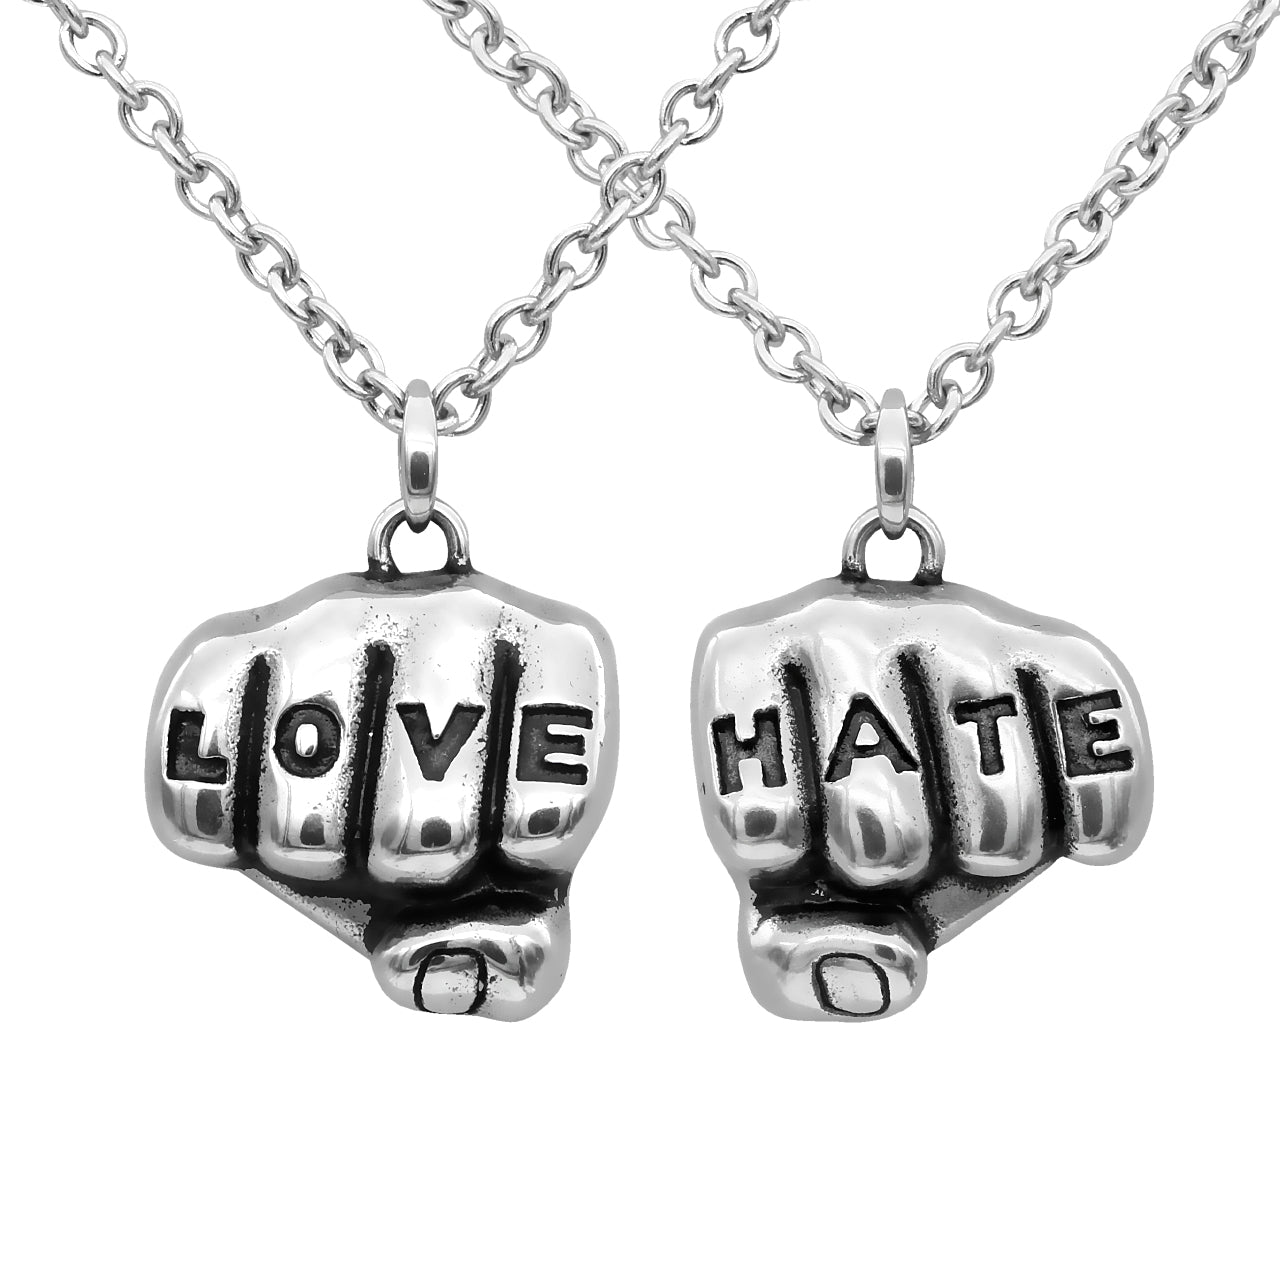 Love and Hate Tattooed Hands Necklaces: Stainless Steel Pendant Set
Show your love conquers hate with our Love and Hate Tattooed Hands necklaces. Each pendant features either "LOVE" or "HATE" etched on stainless steel. Available as a - Jewelry & Watches - Bijou Her -  -  - 